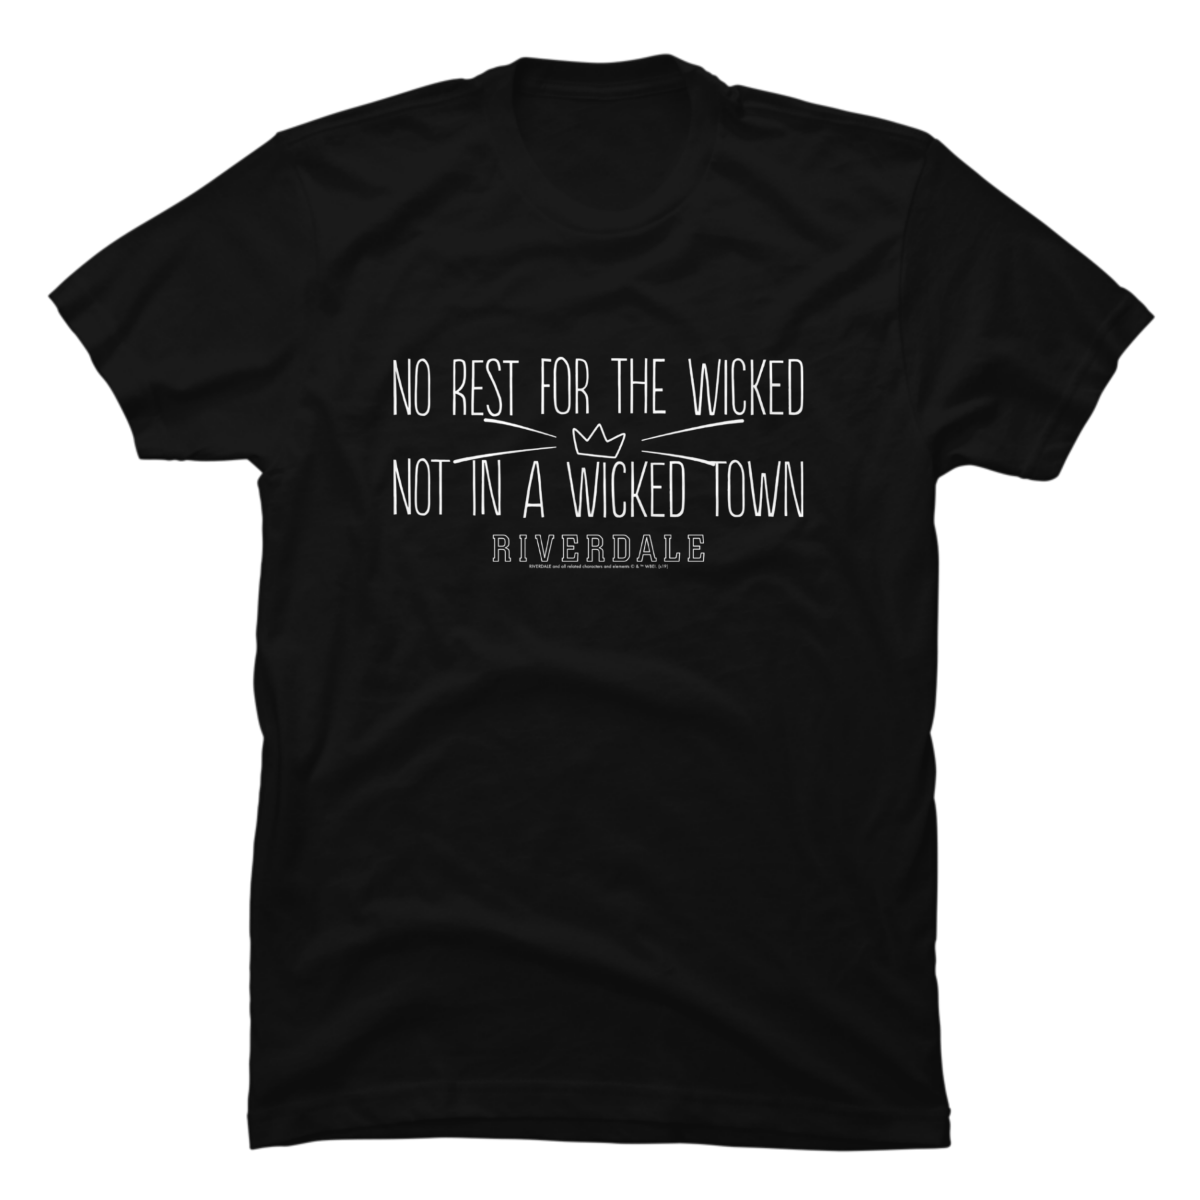 no rest for the wicked shirt